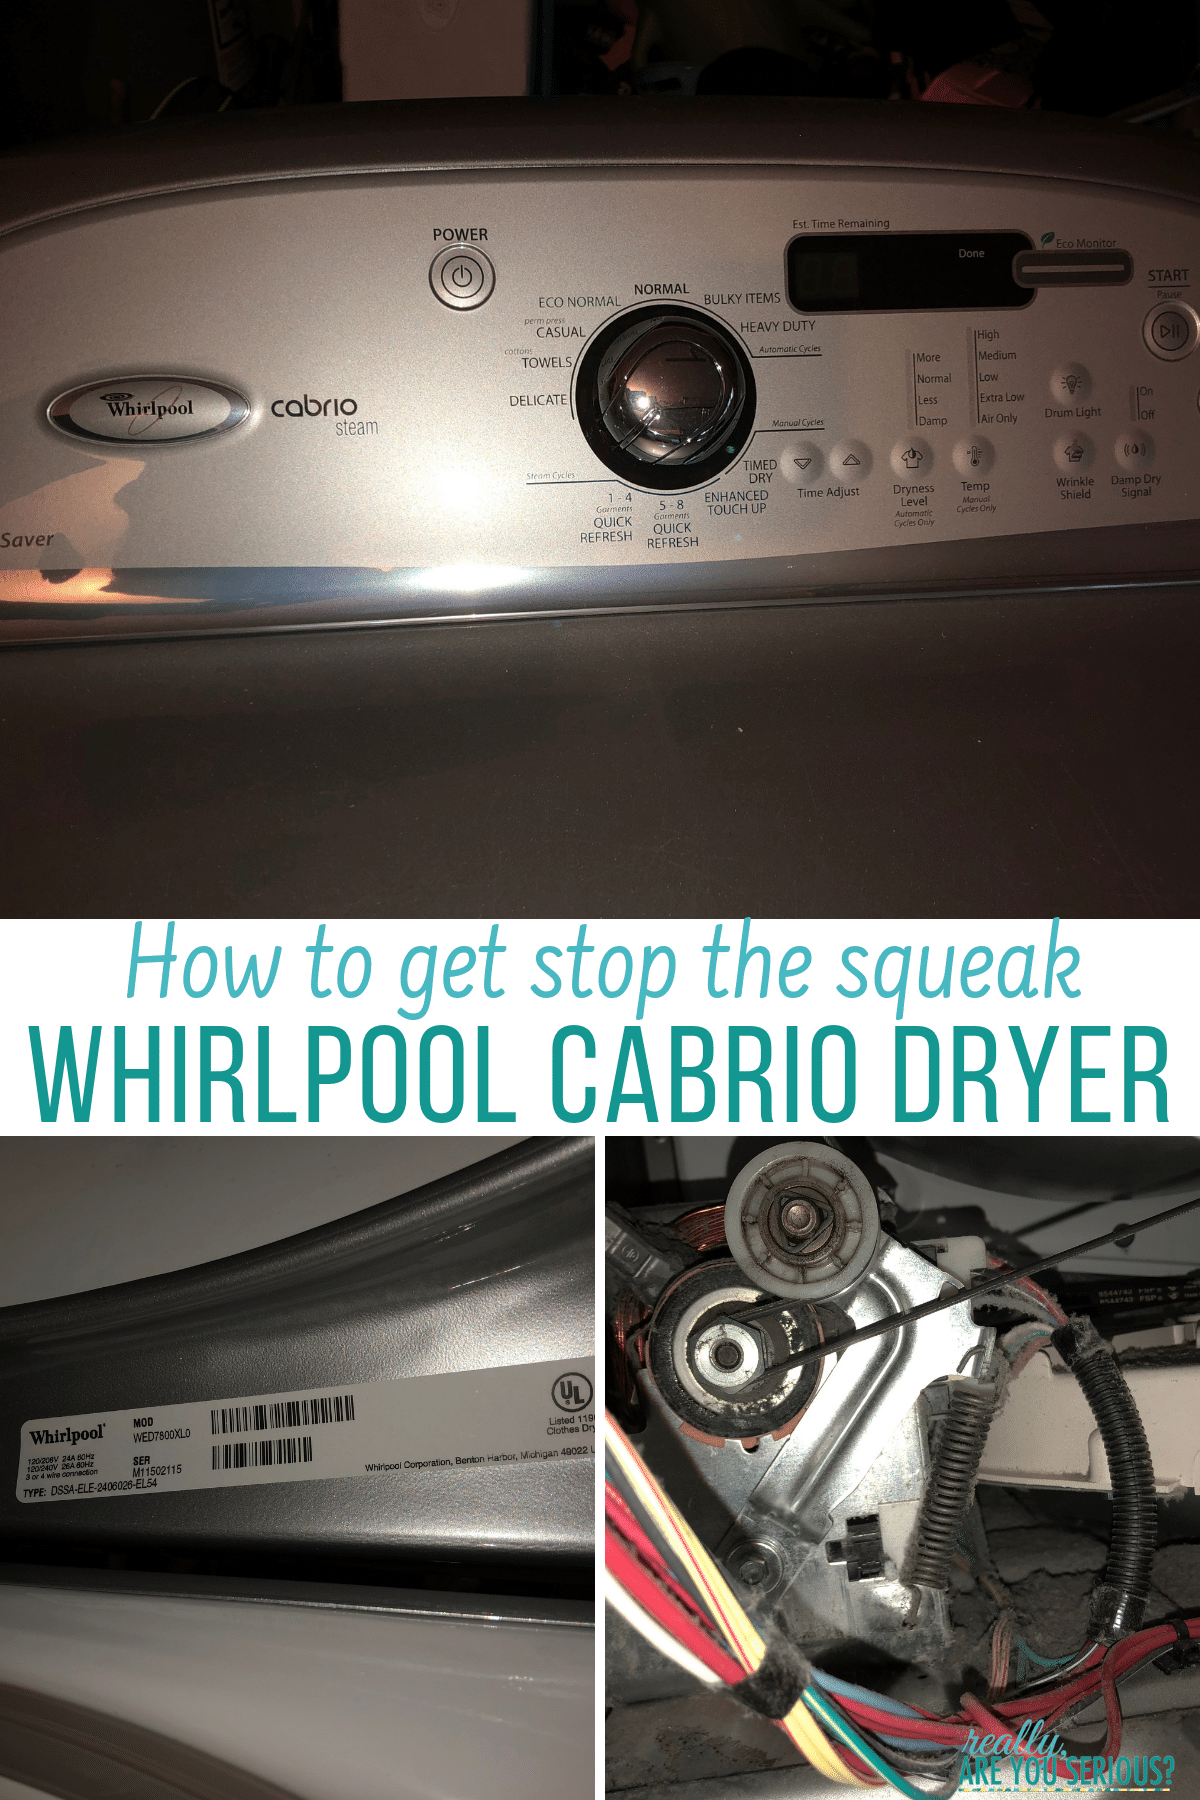 How to stop the squeak whirlpool cabrio dryer